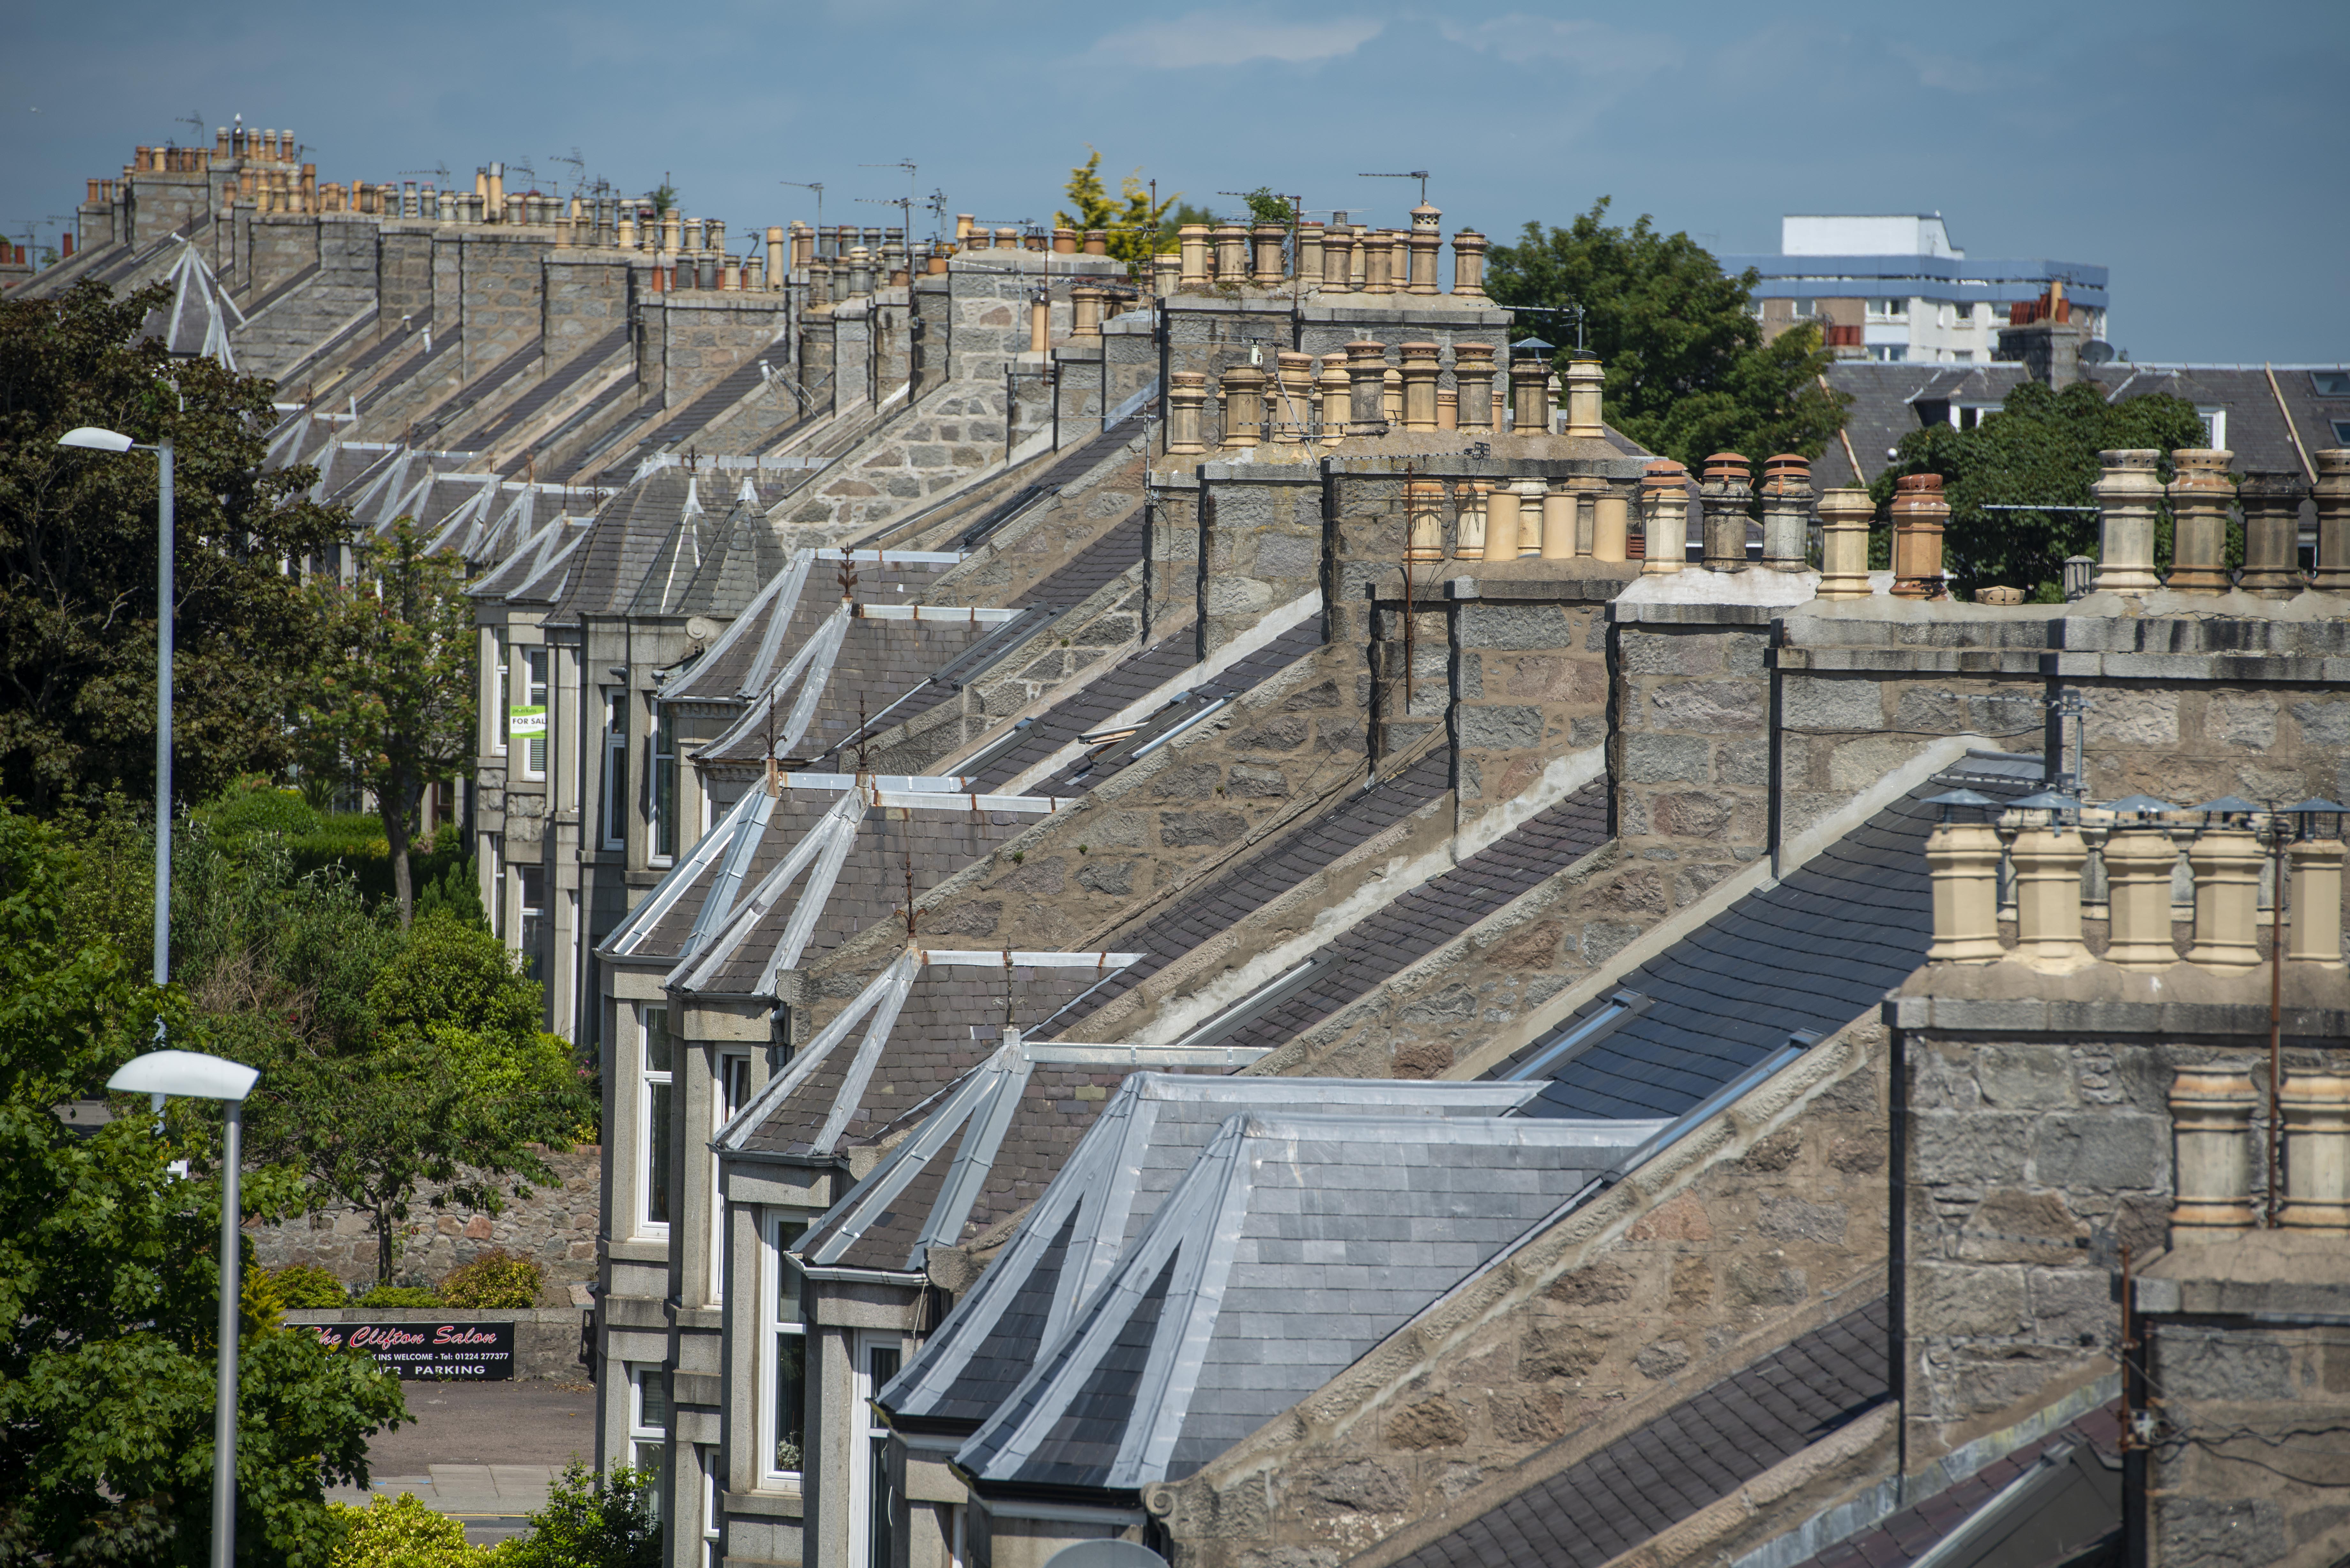 Rent consultation launched by Aberdeen City Council